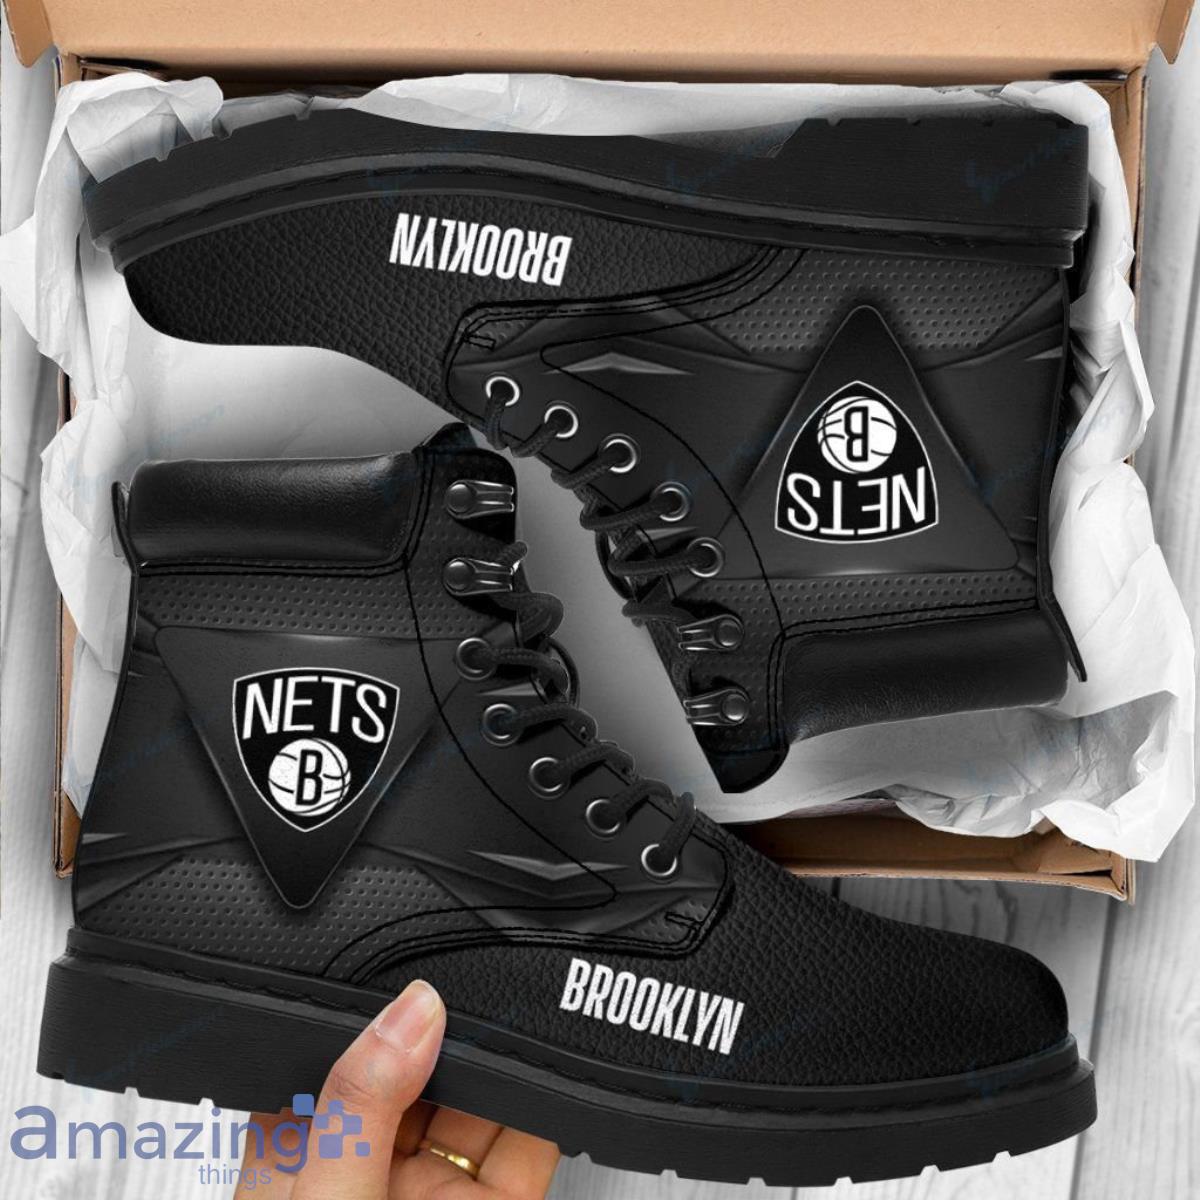 Brooklyn Nets Football Team Leather Boots For Men Women Great Gift For Fans Product Photo 1